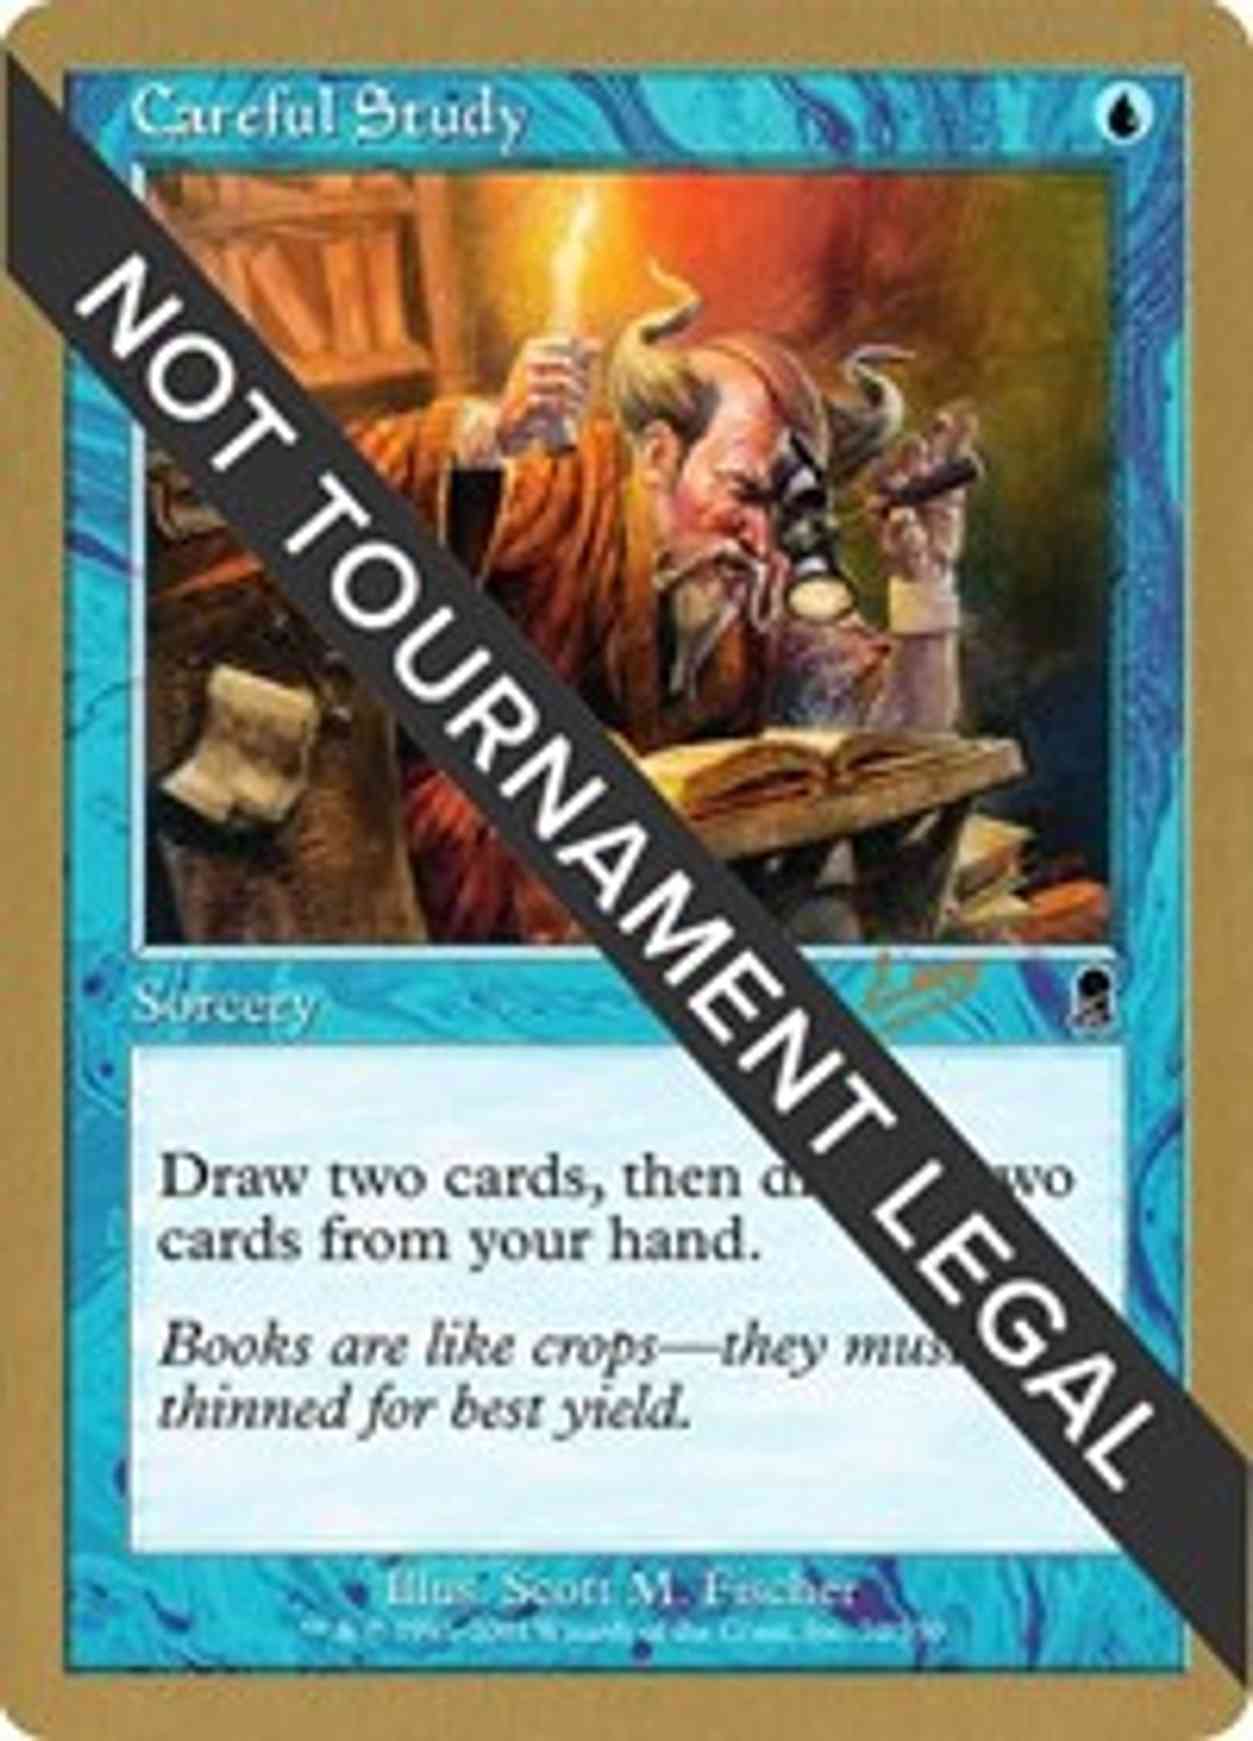 Careful Study - 2002 Raphael Levy (ODY) magic card front